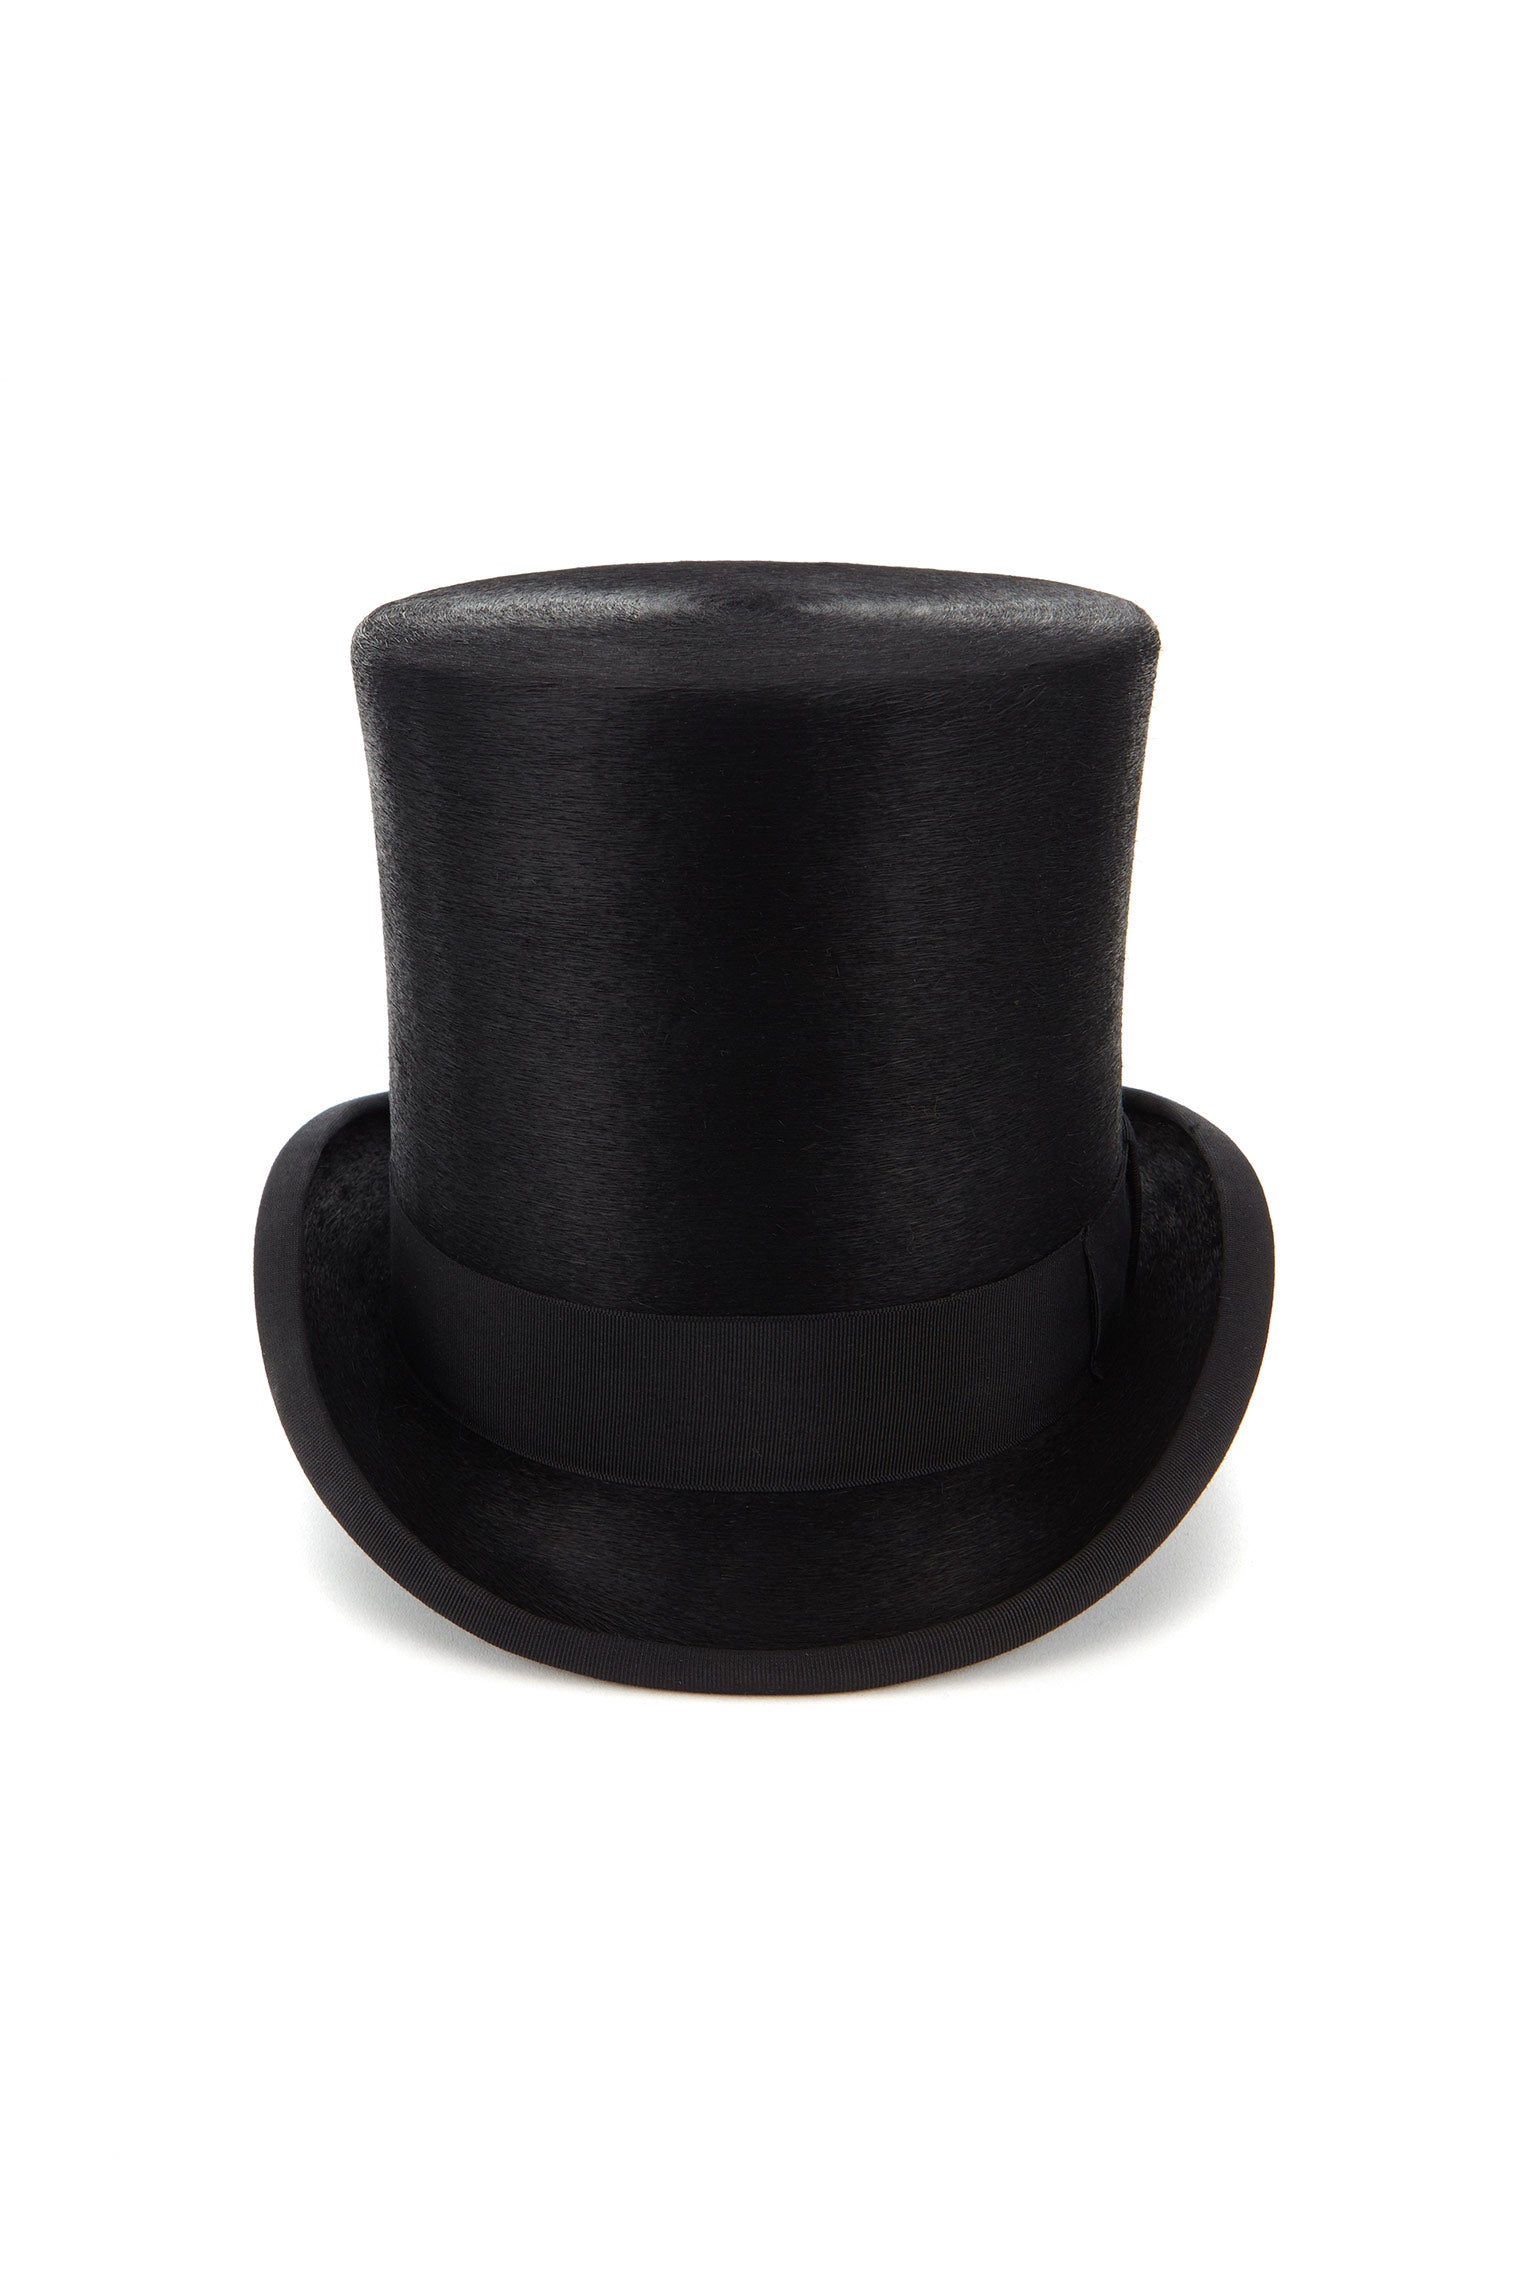 Westminster High Crown Top Hat - Royal Ascot Hats - Lock & Co. Hatters London UK